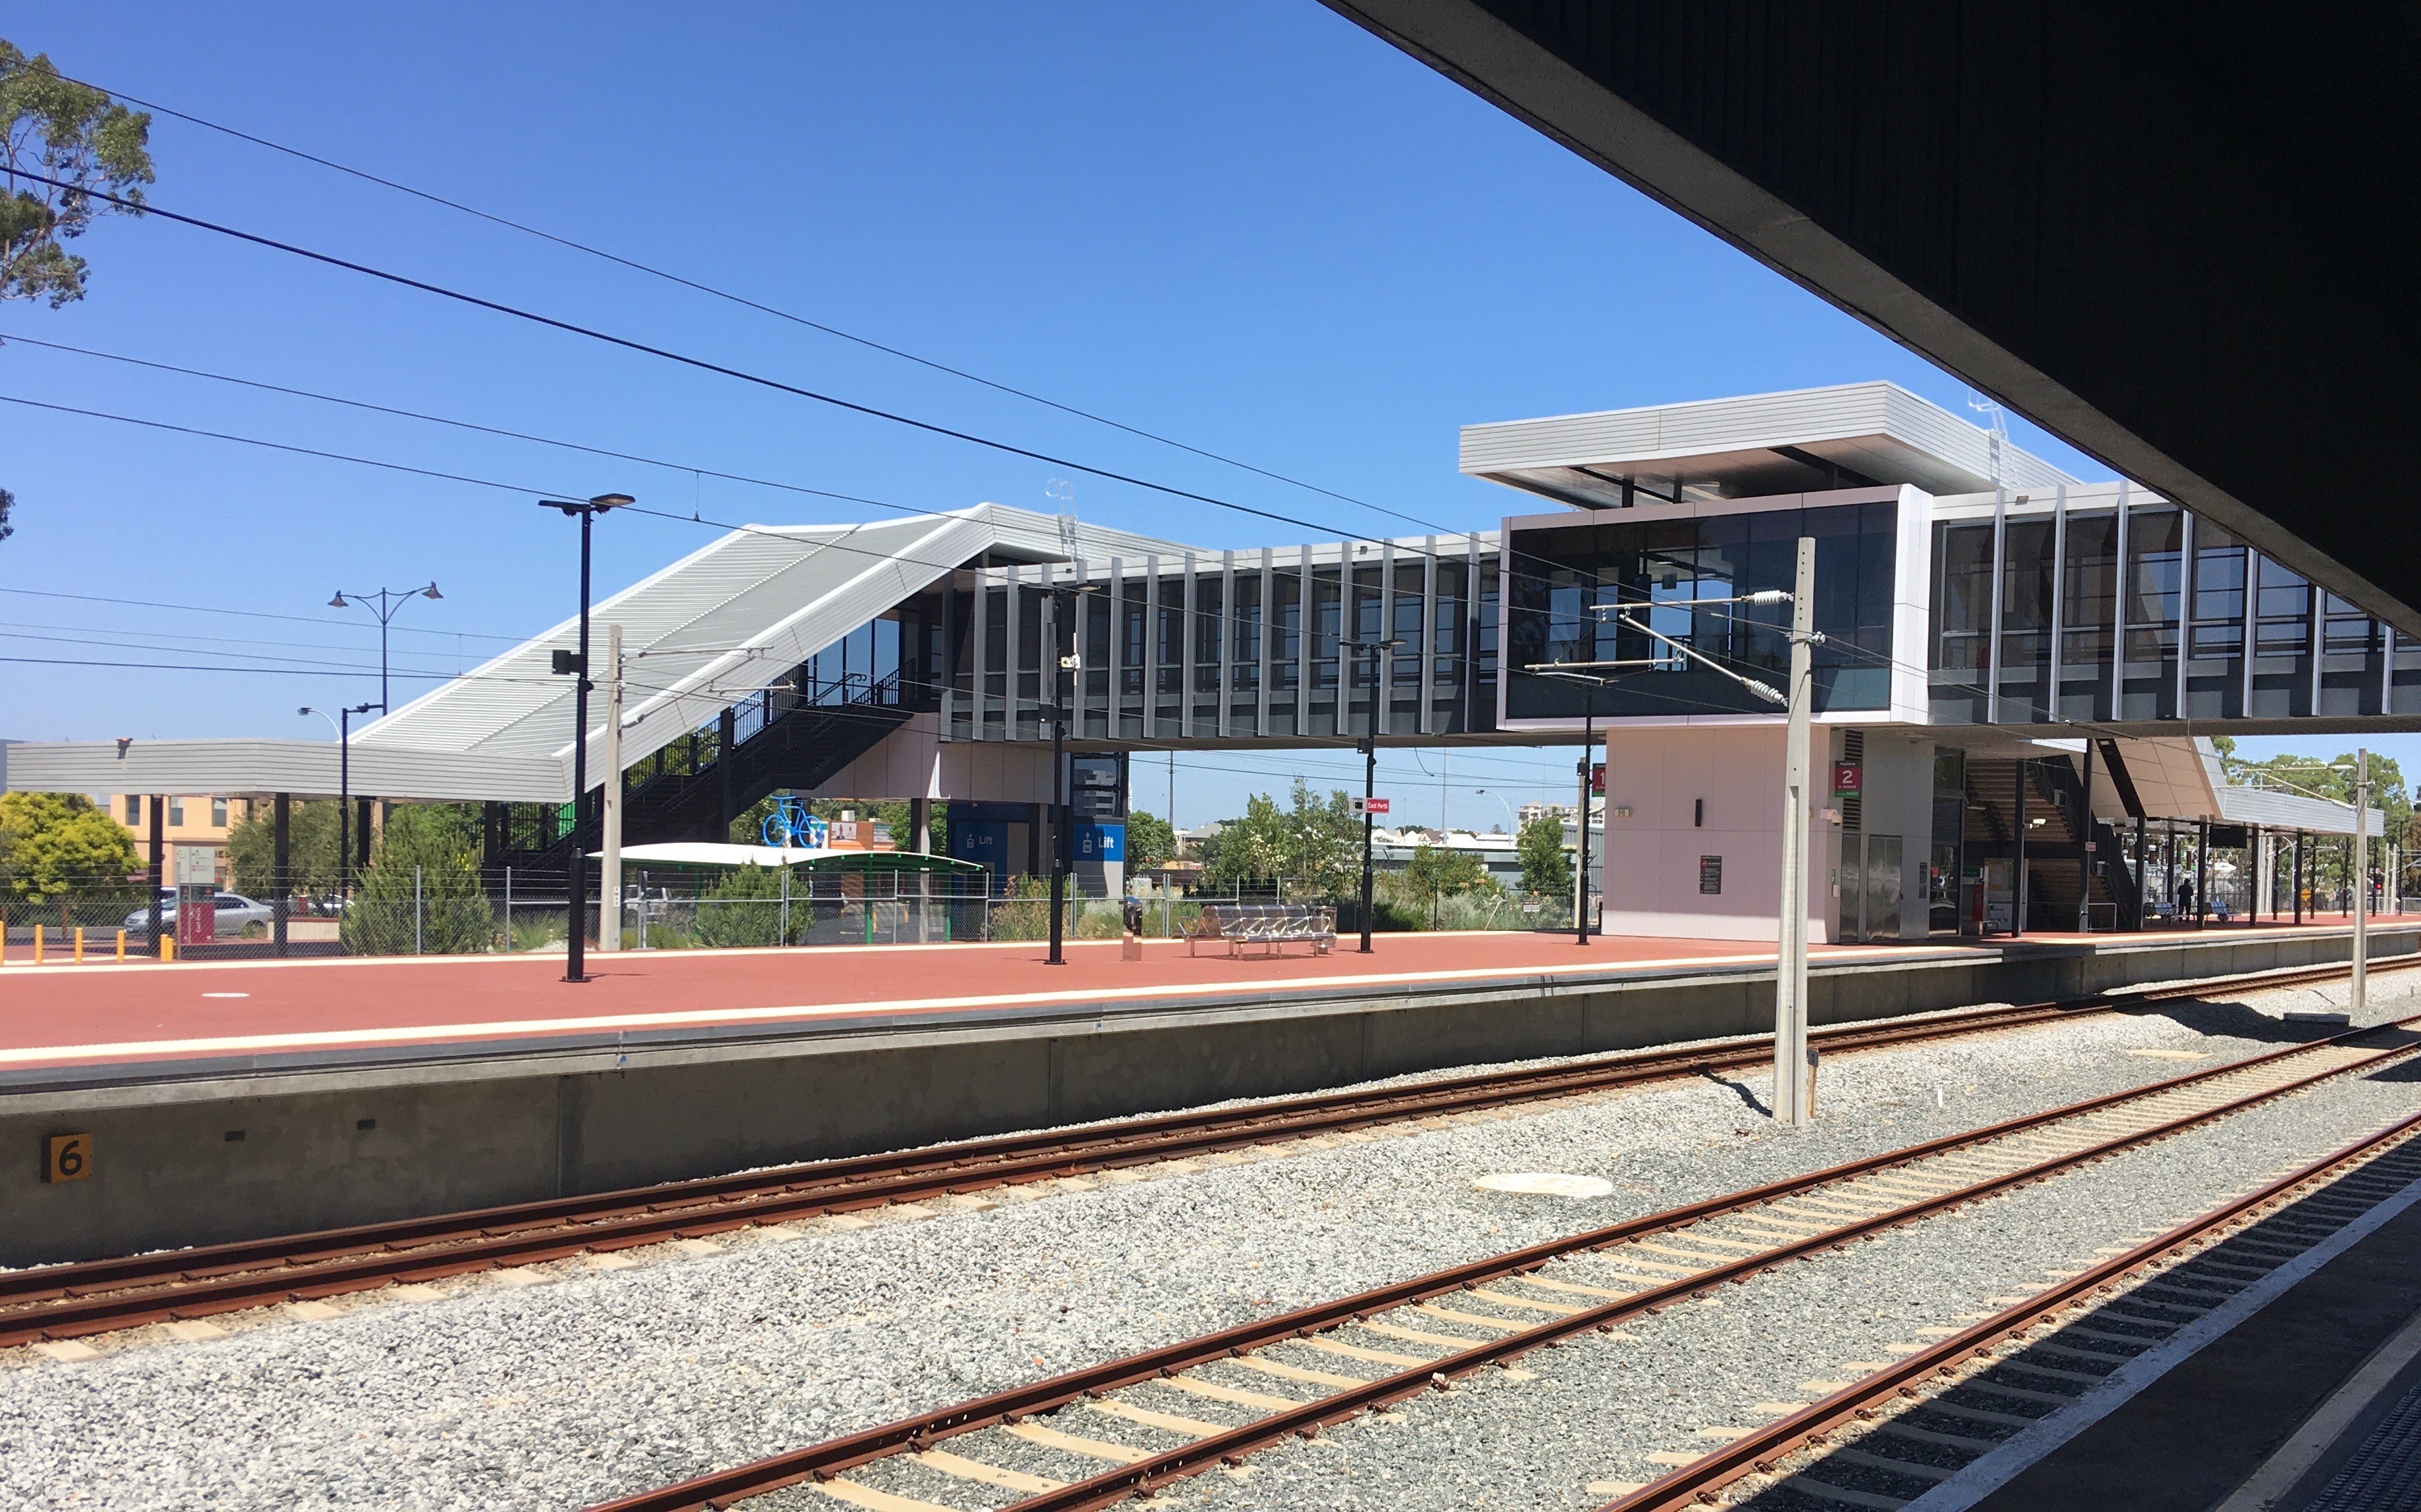 East_Perth_railway_station_from_Public_Transport_Centre.jpg